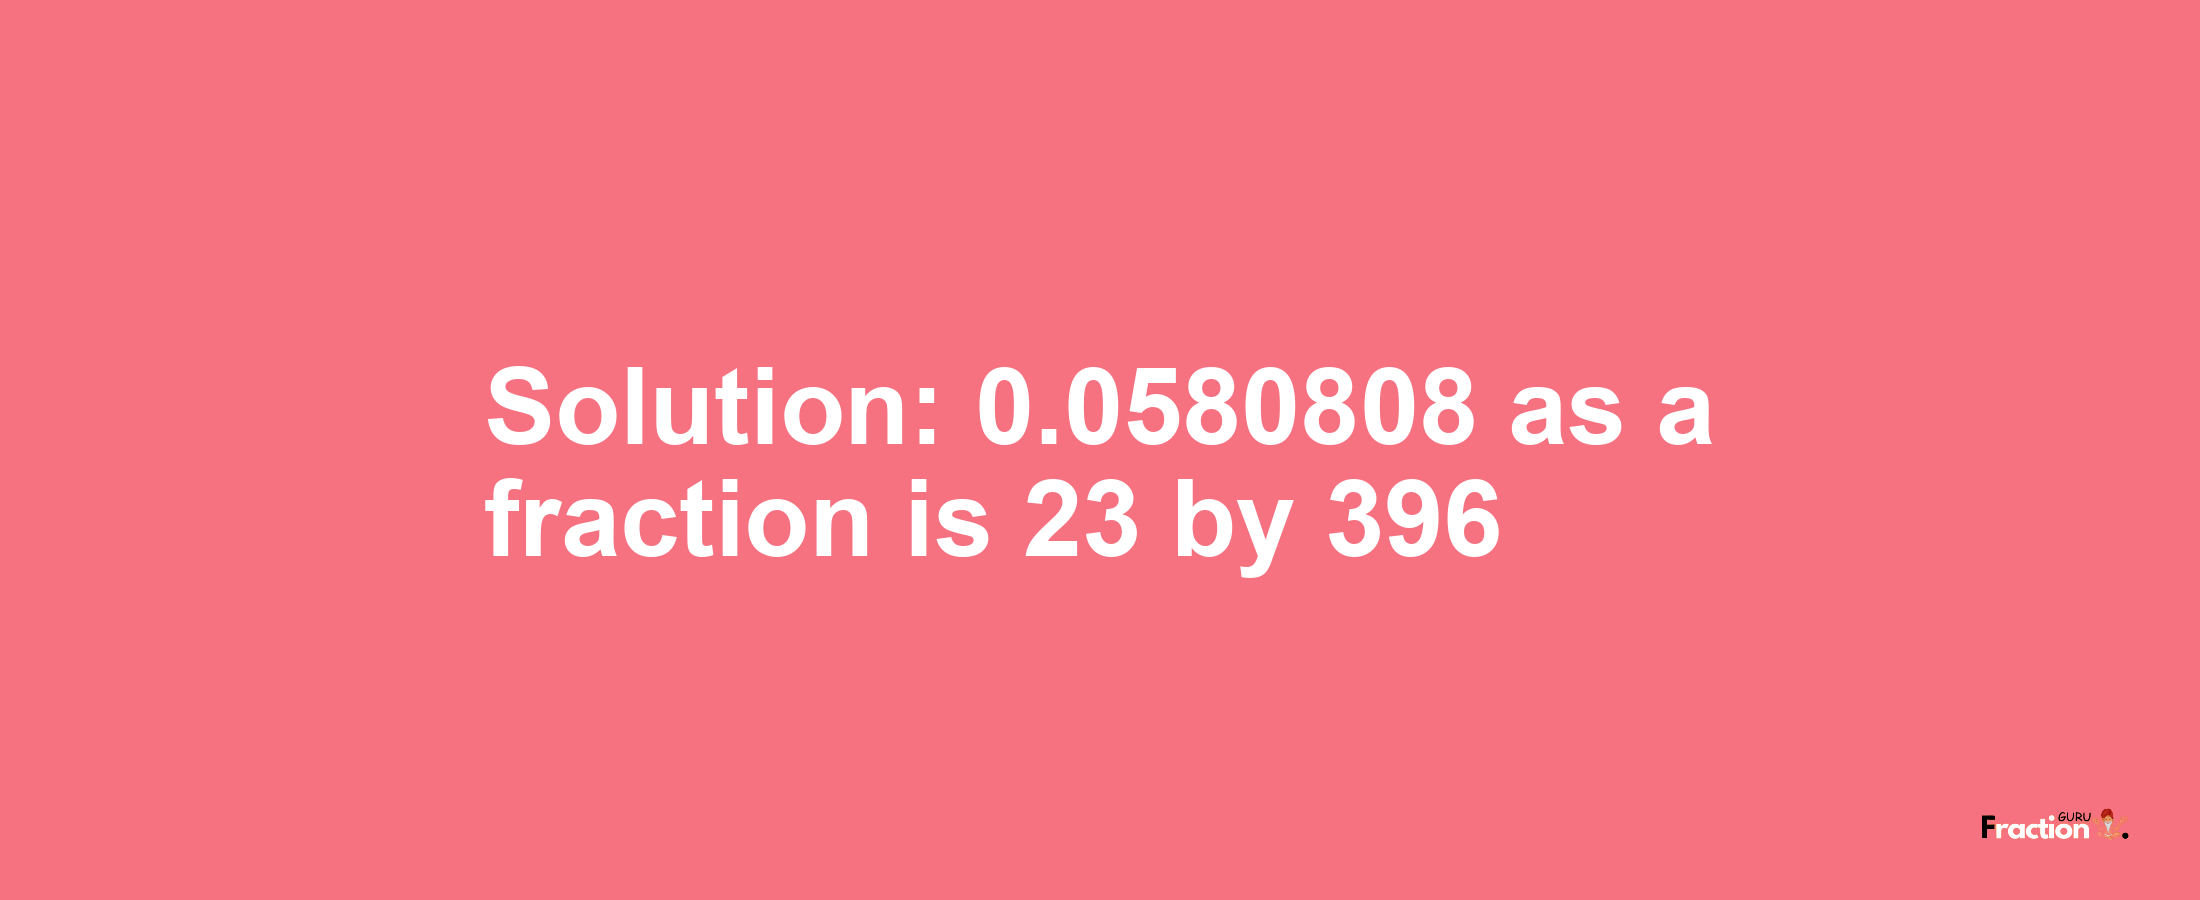 Solution:0.0580808 as a fraction is 23/396